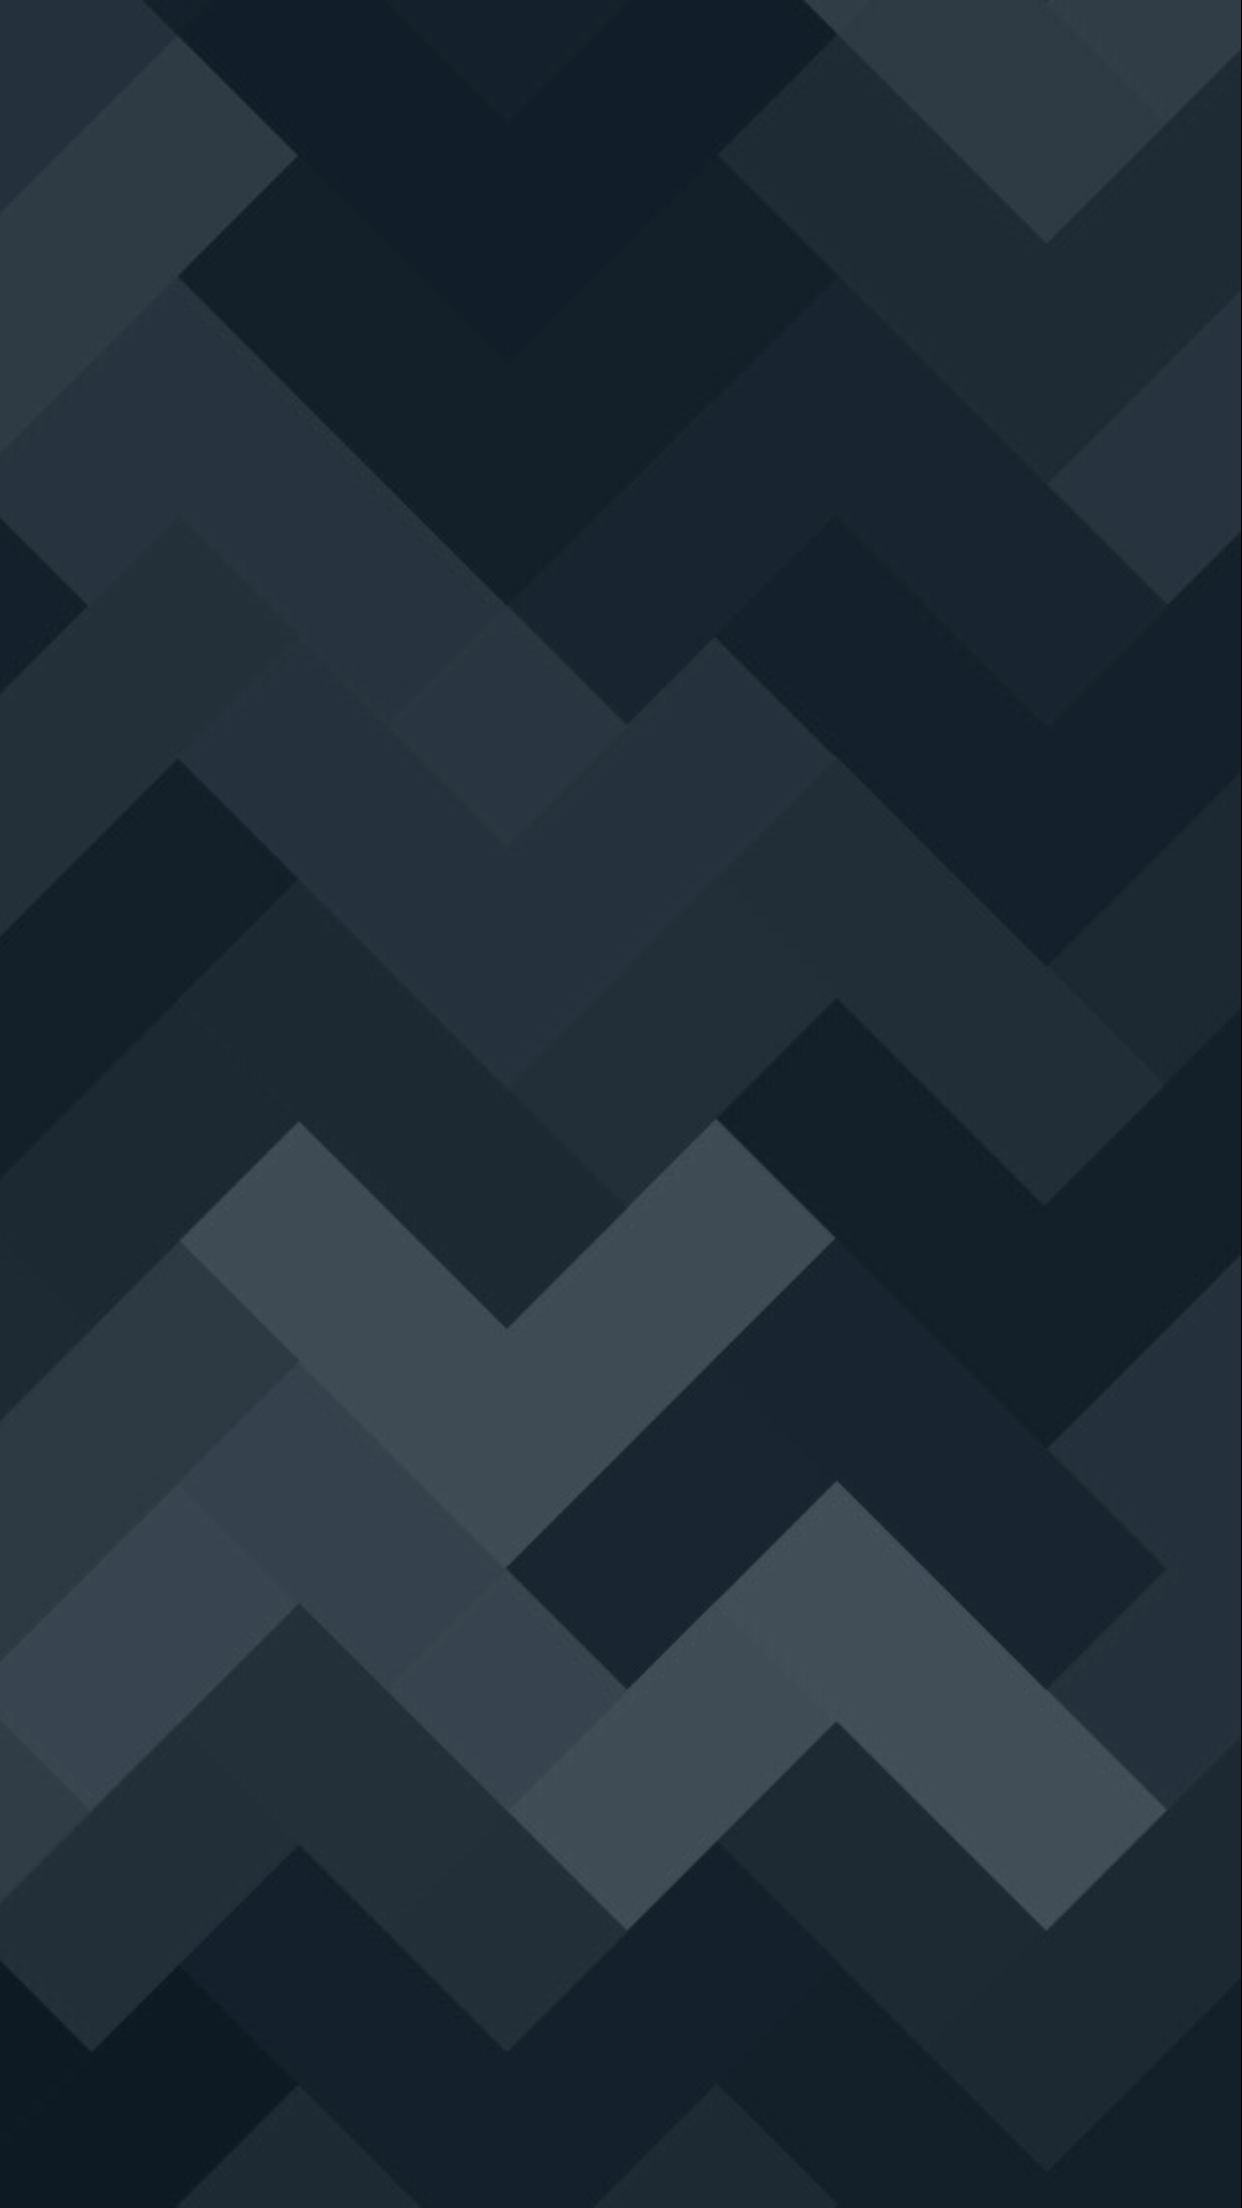 Wallpaper Of The Week Geometric For iPhone